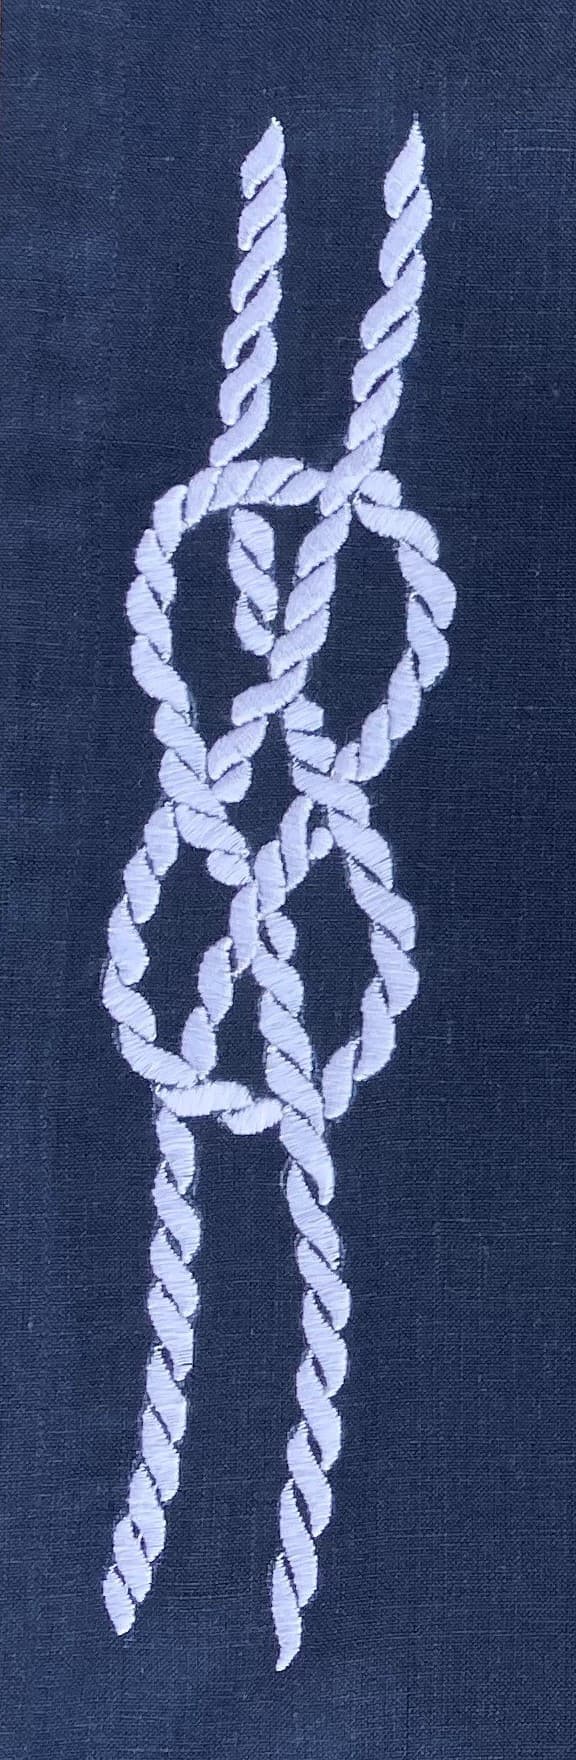 Square knot